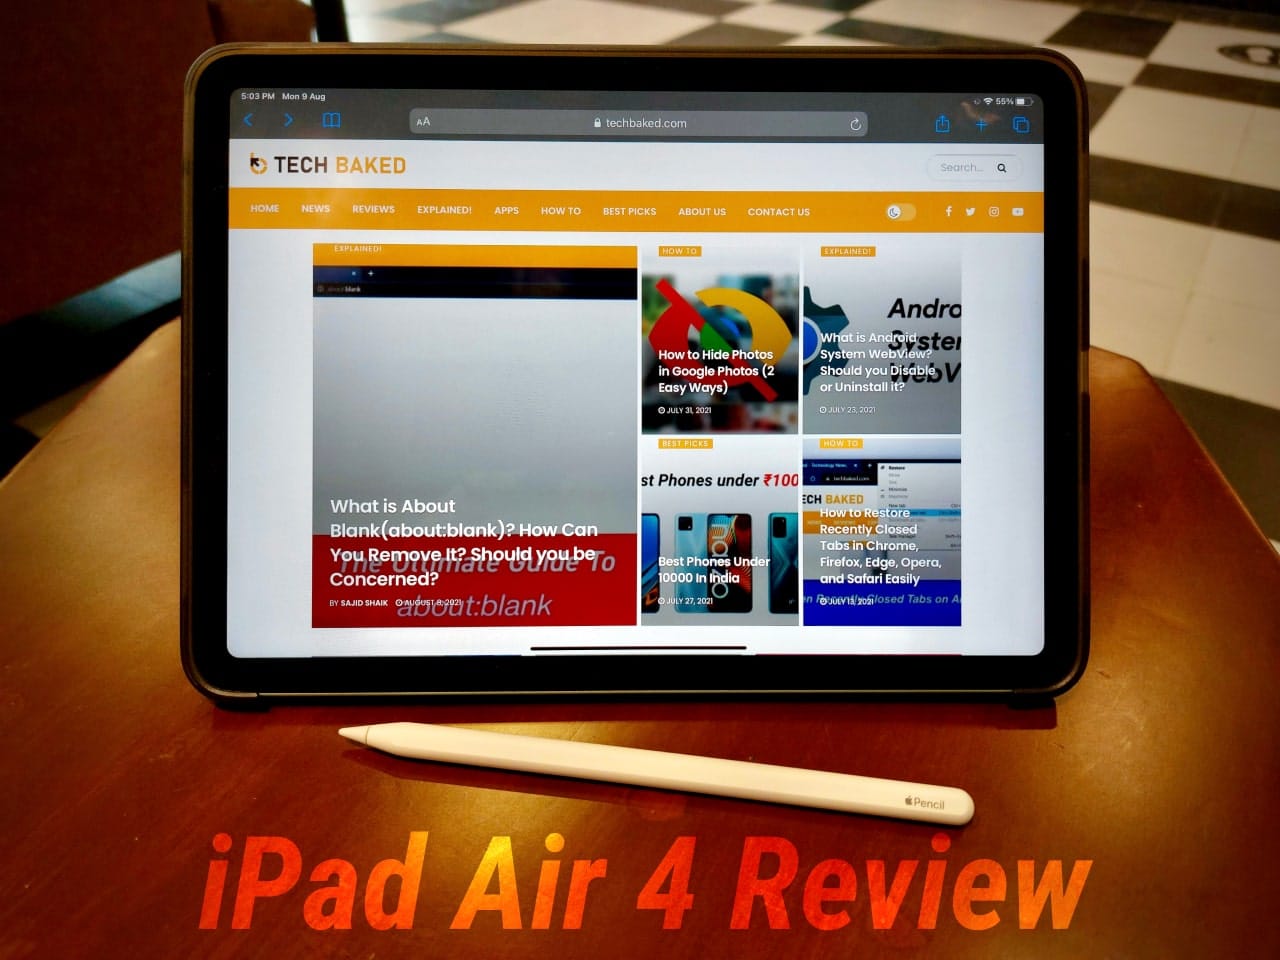 iPad Air 4 (2020) with Apple Pencil Review